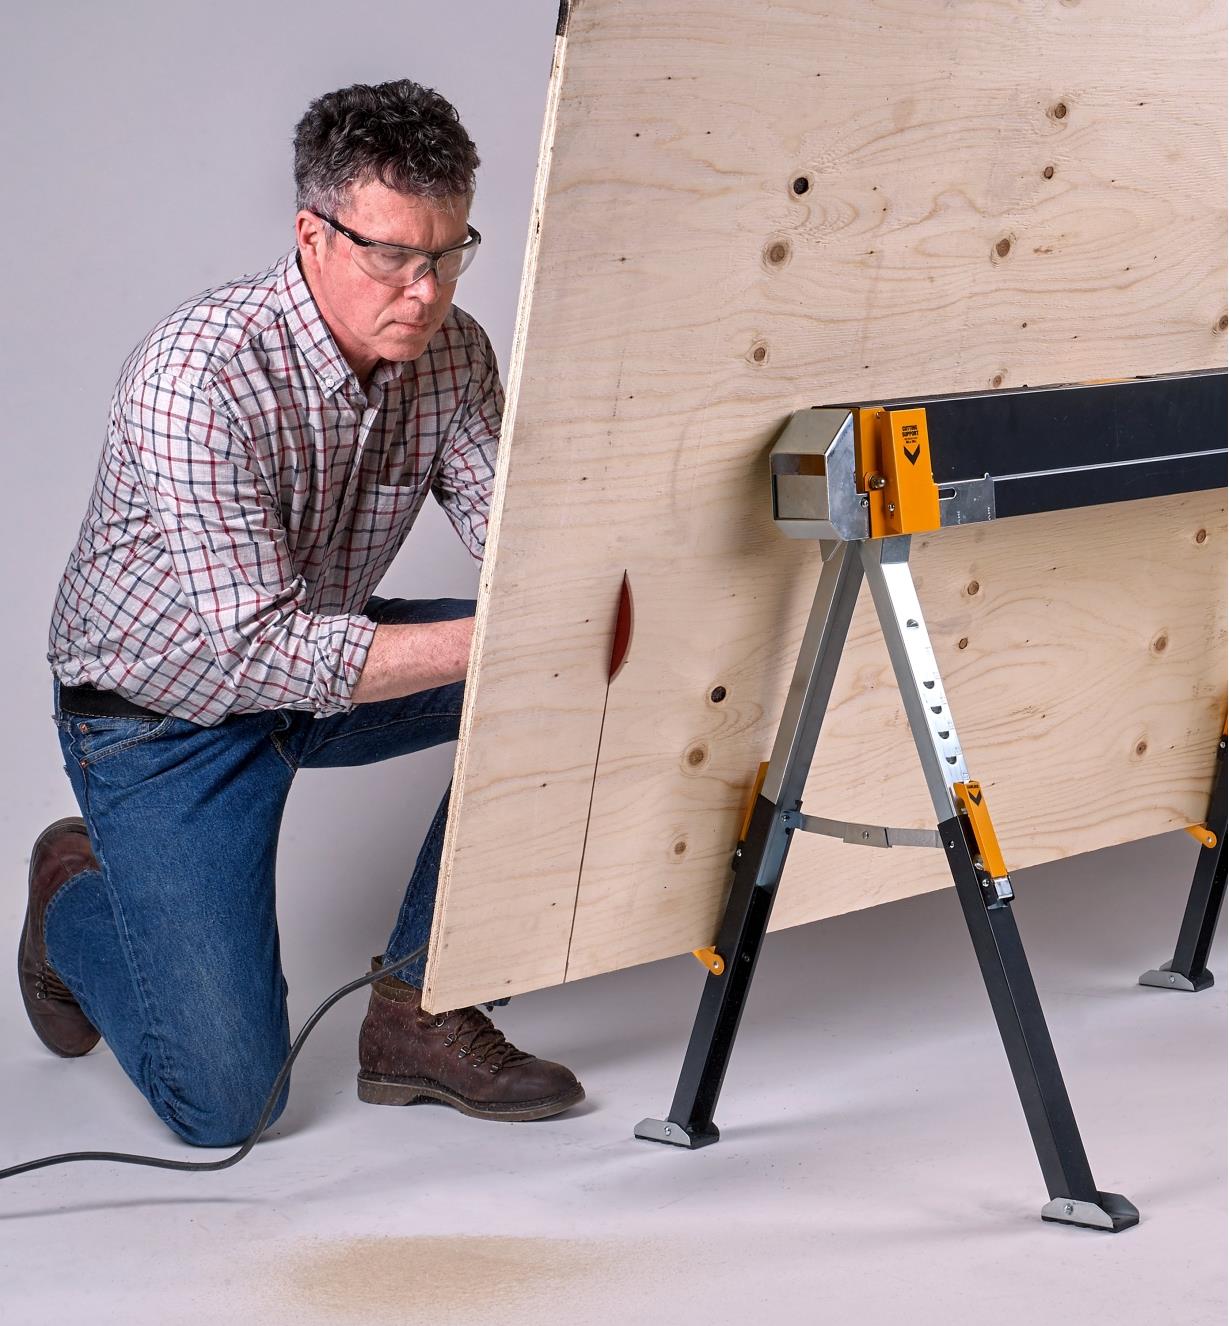 Using a circular saw to cut a plywood sheet held vertically on the lower brackets of a C700 sawhorse